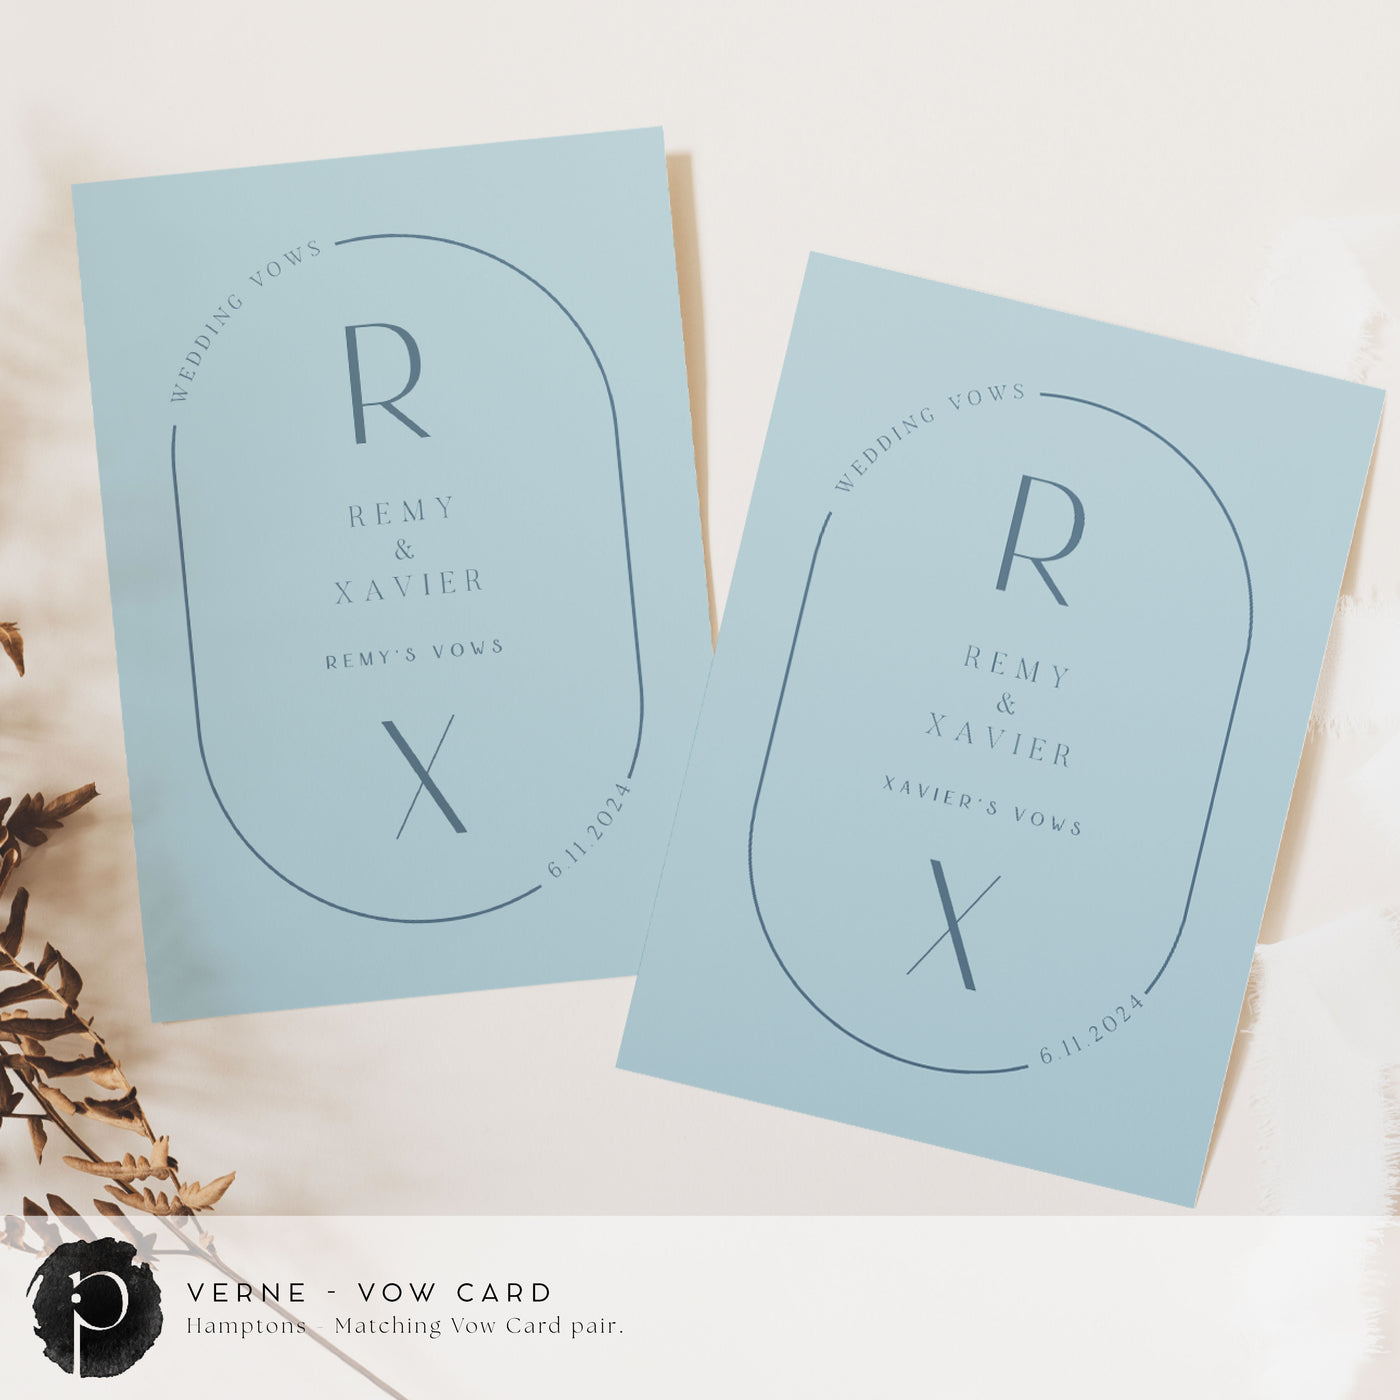 A pair of vow cards to write your wedding vows on in a modern midcentury wedding theme with ocean blue writing on duck egg blue or dusty blue background